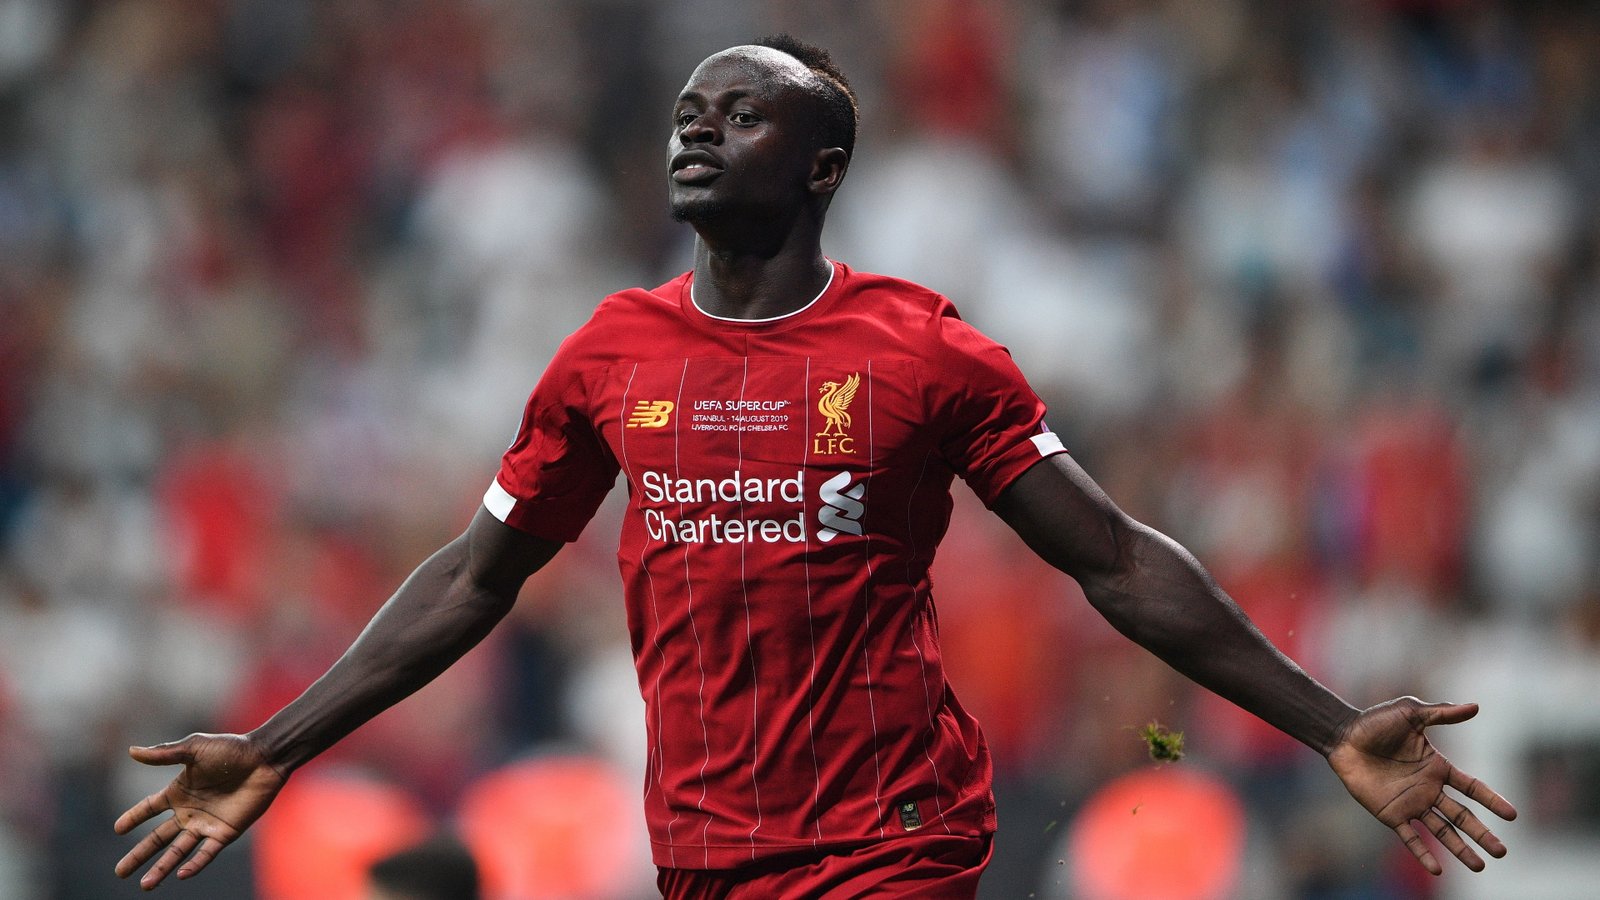 Senegal’s Sadio Mane gunning for African Player of the Year - Sports Leo